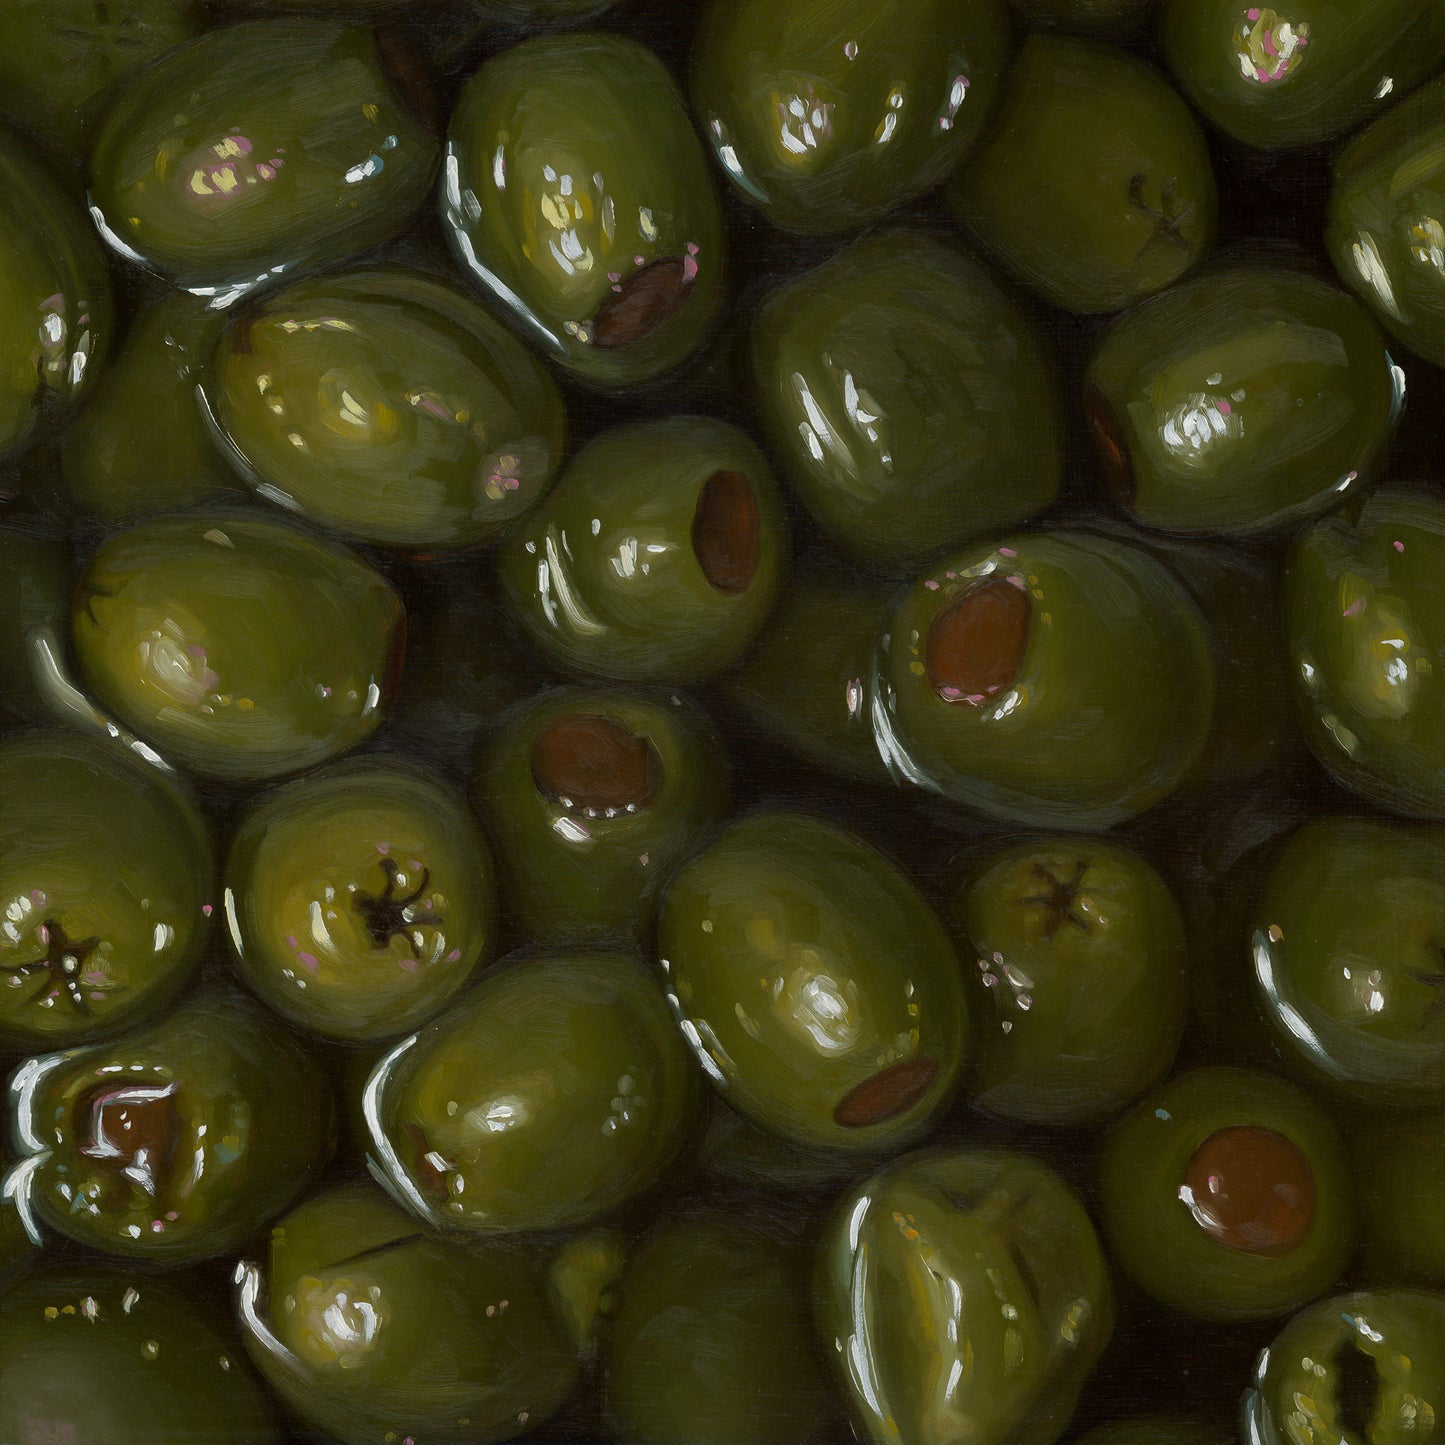 The original painting “Green Olives" by Hannah Kilby from Hannah Michelle Studios.